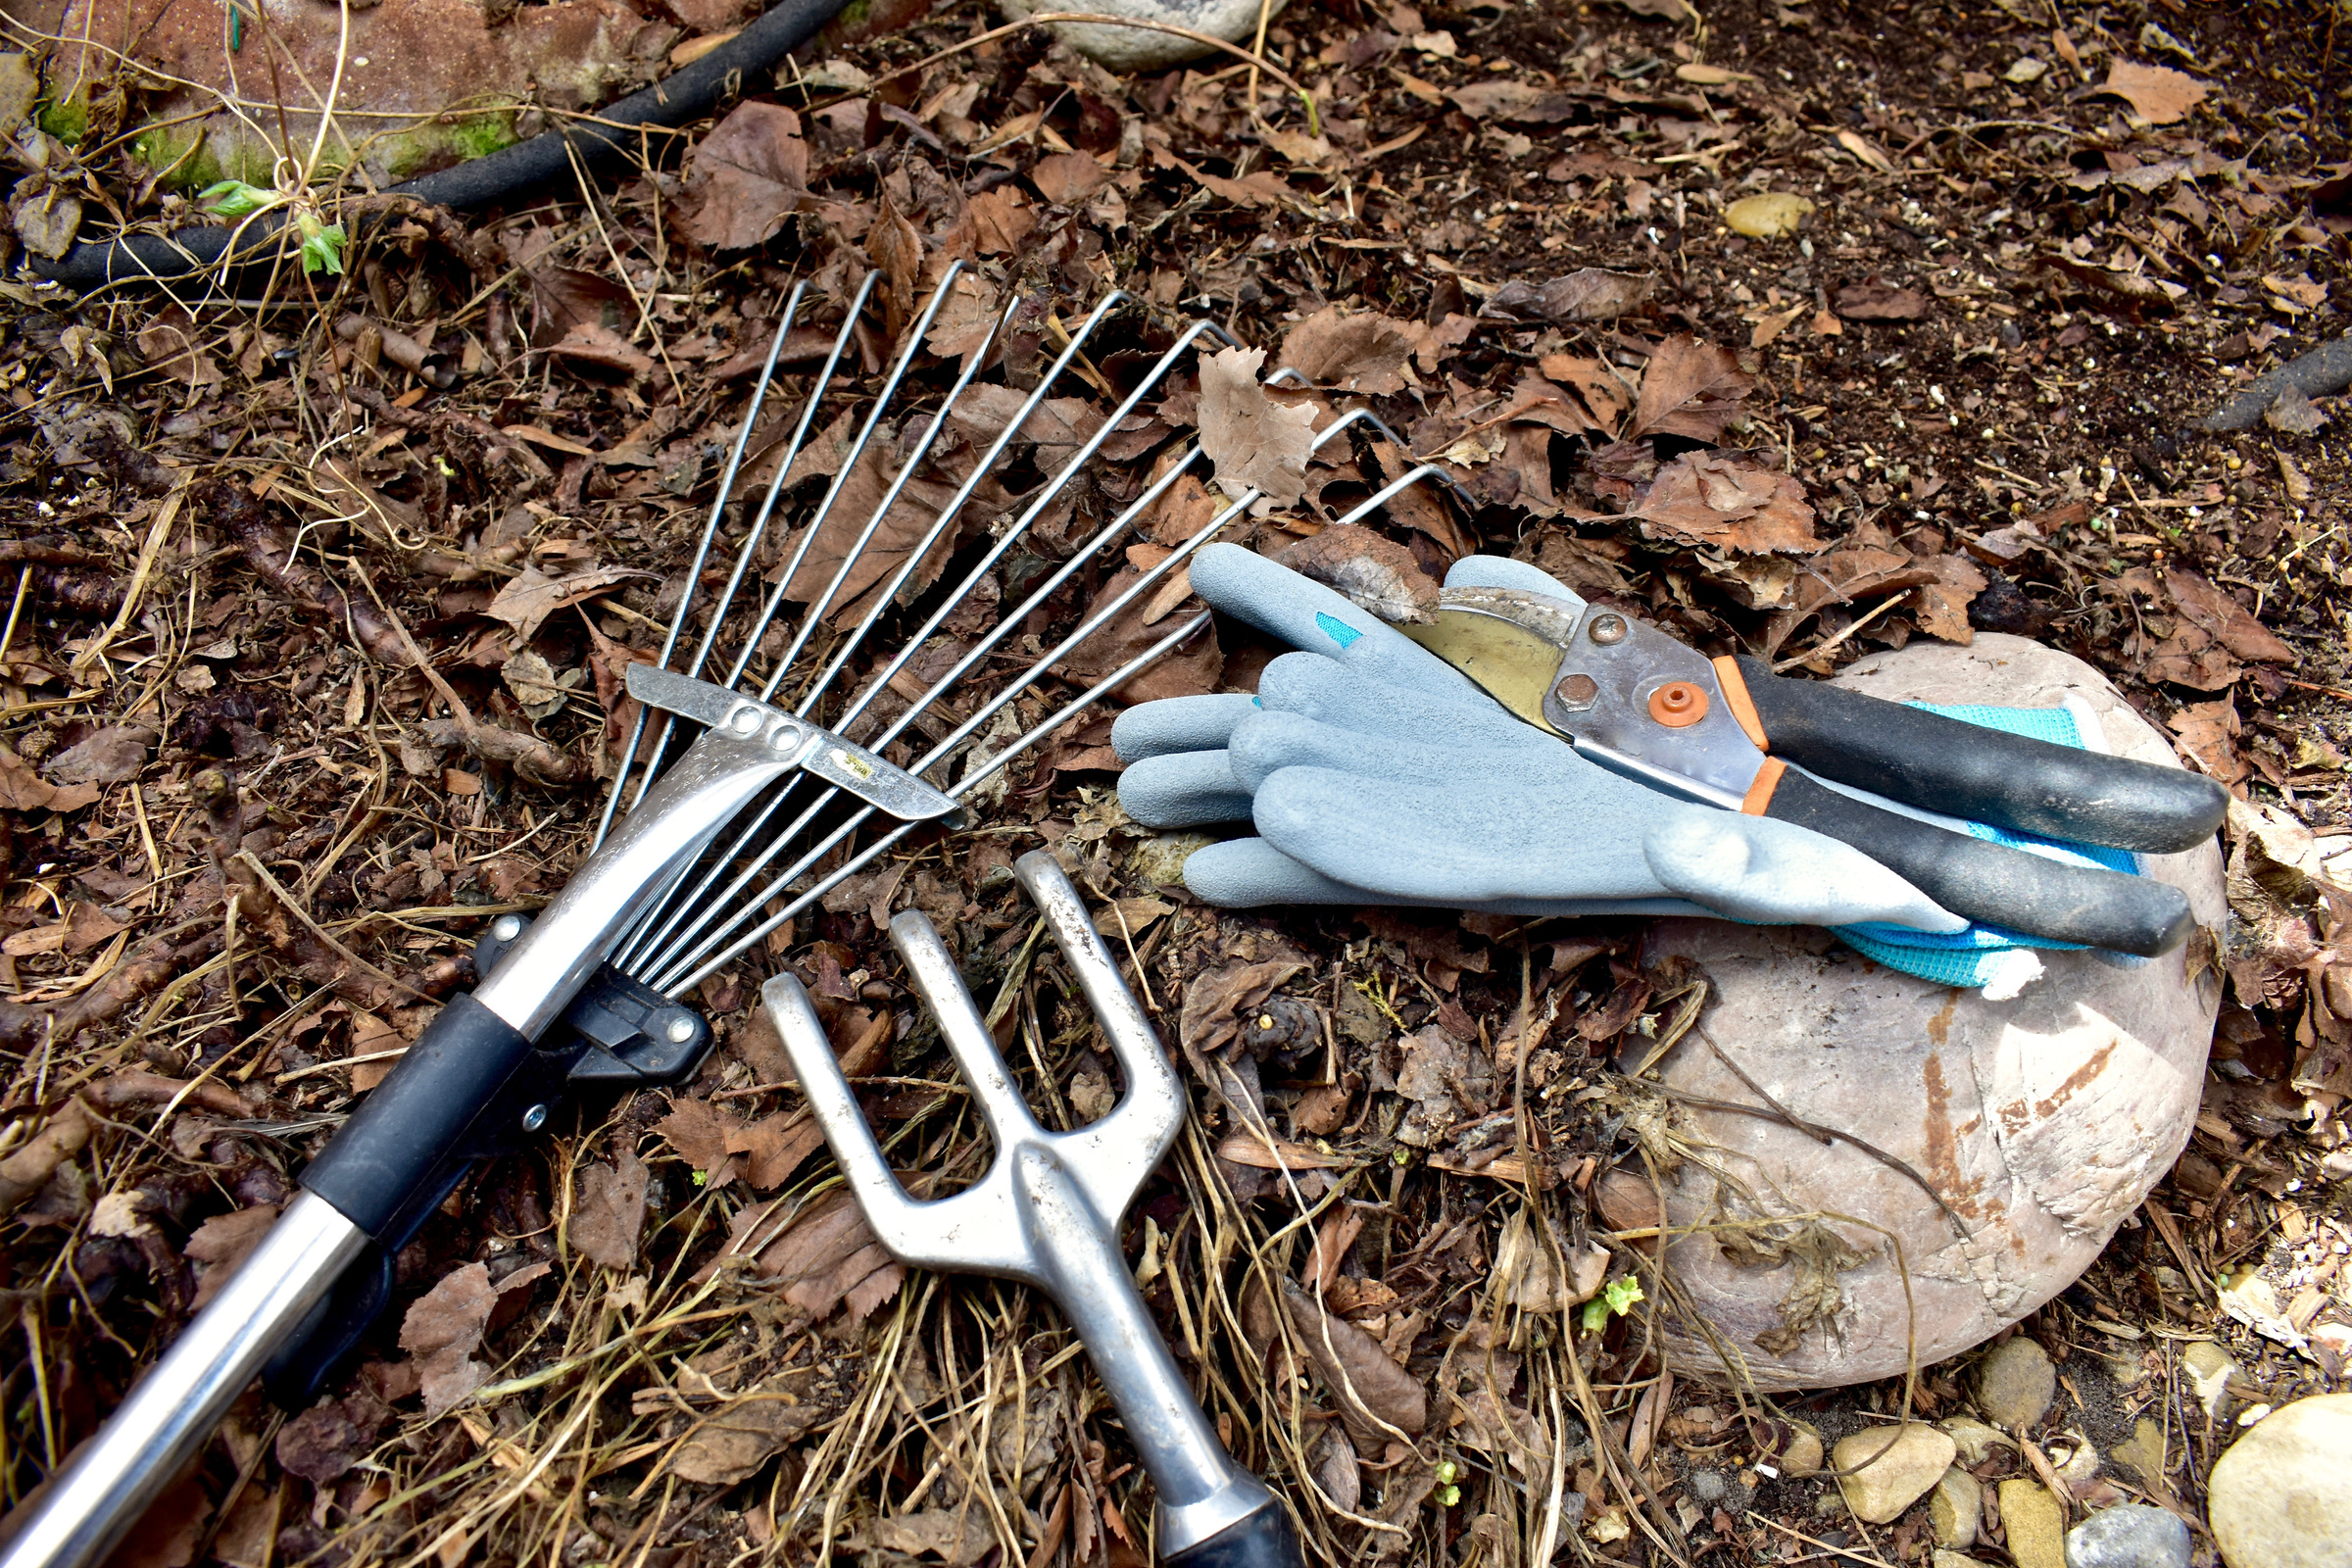 Gardening landscape tools and equipment for spring yard clean-up